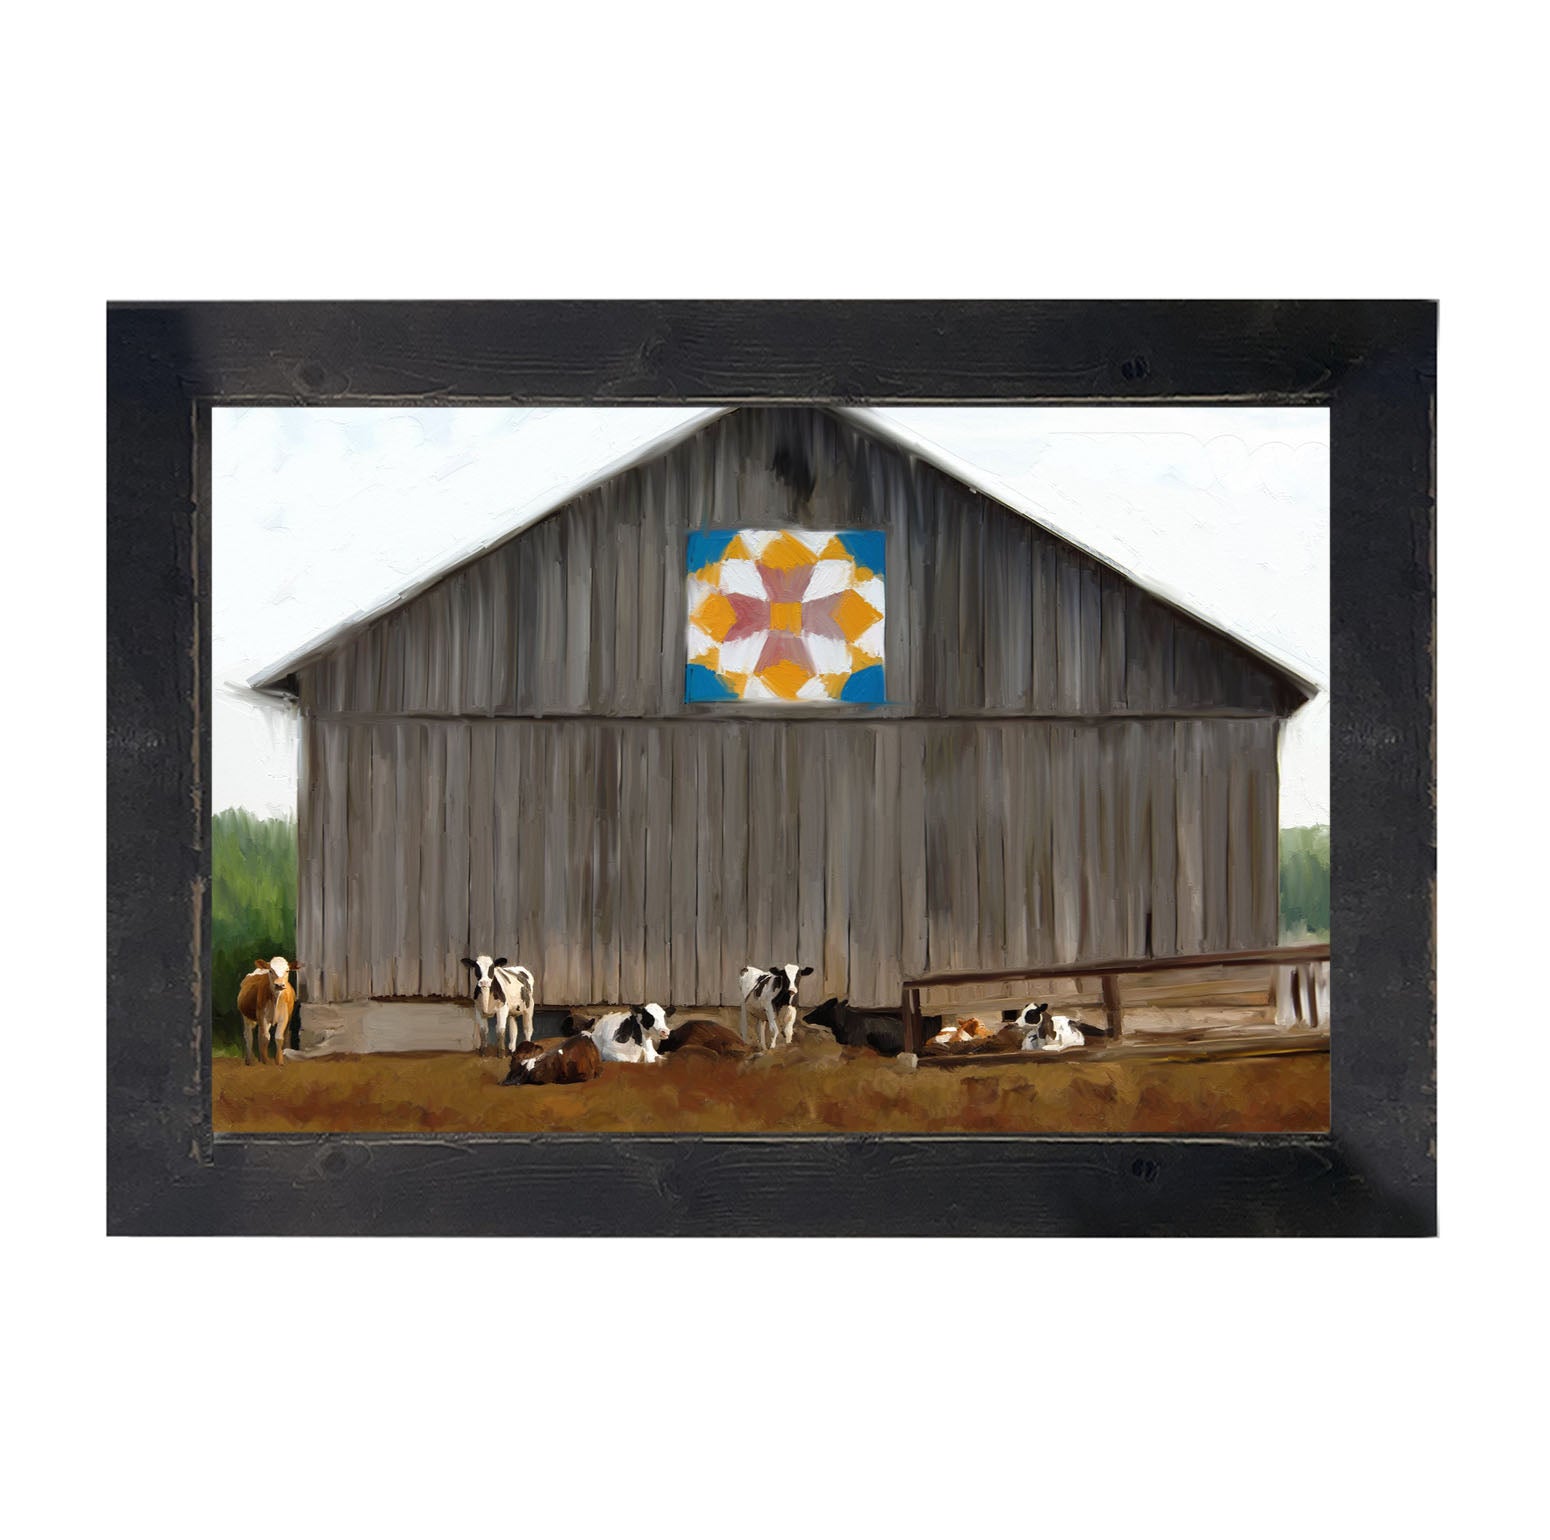 Barn-quilted with cows